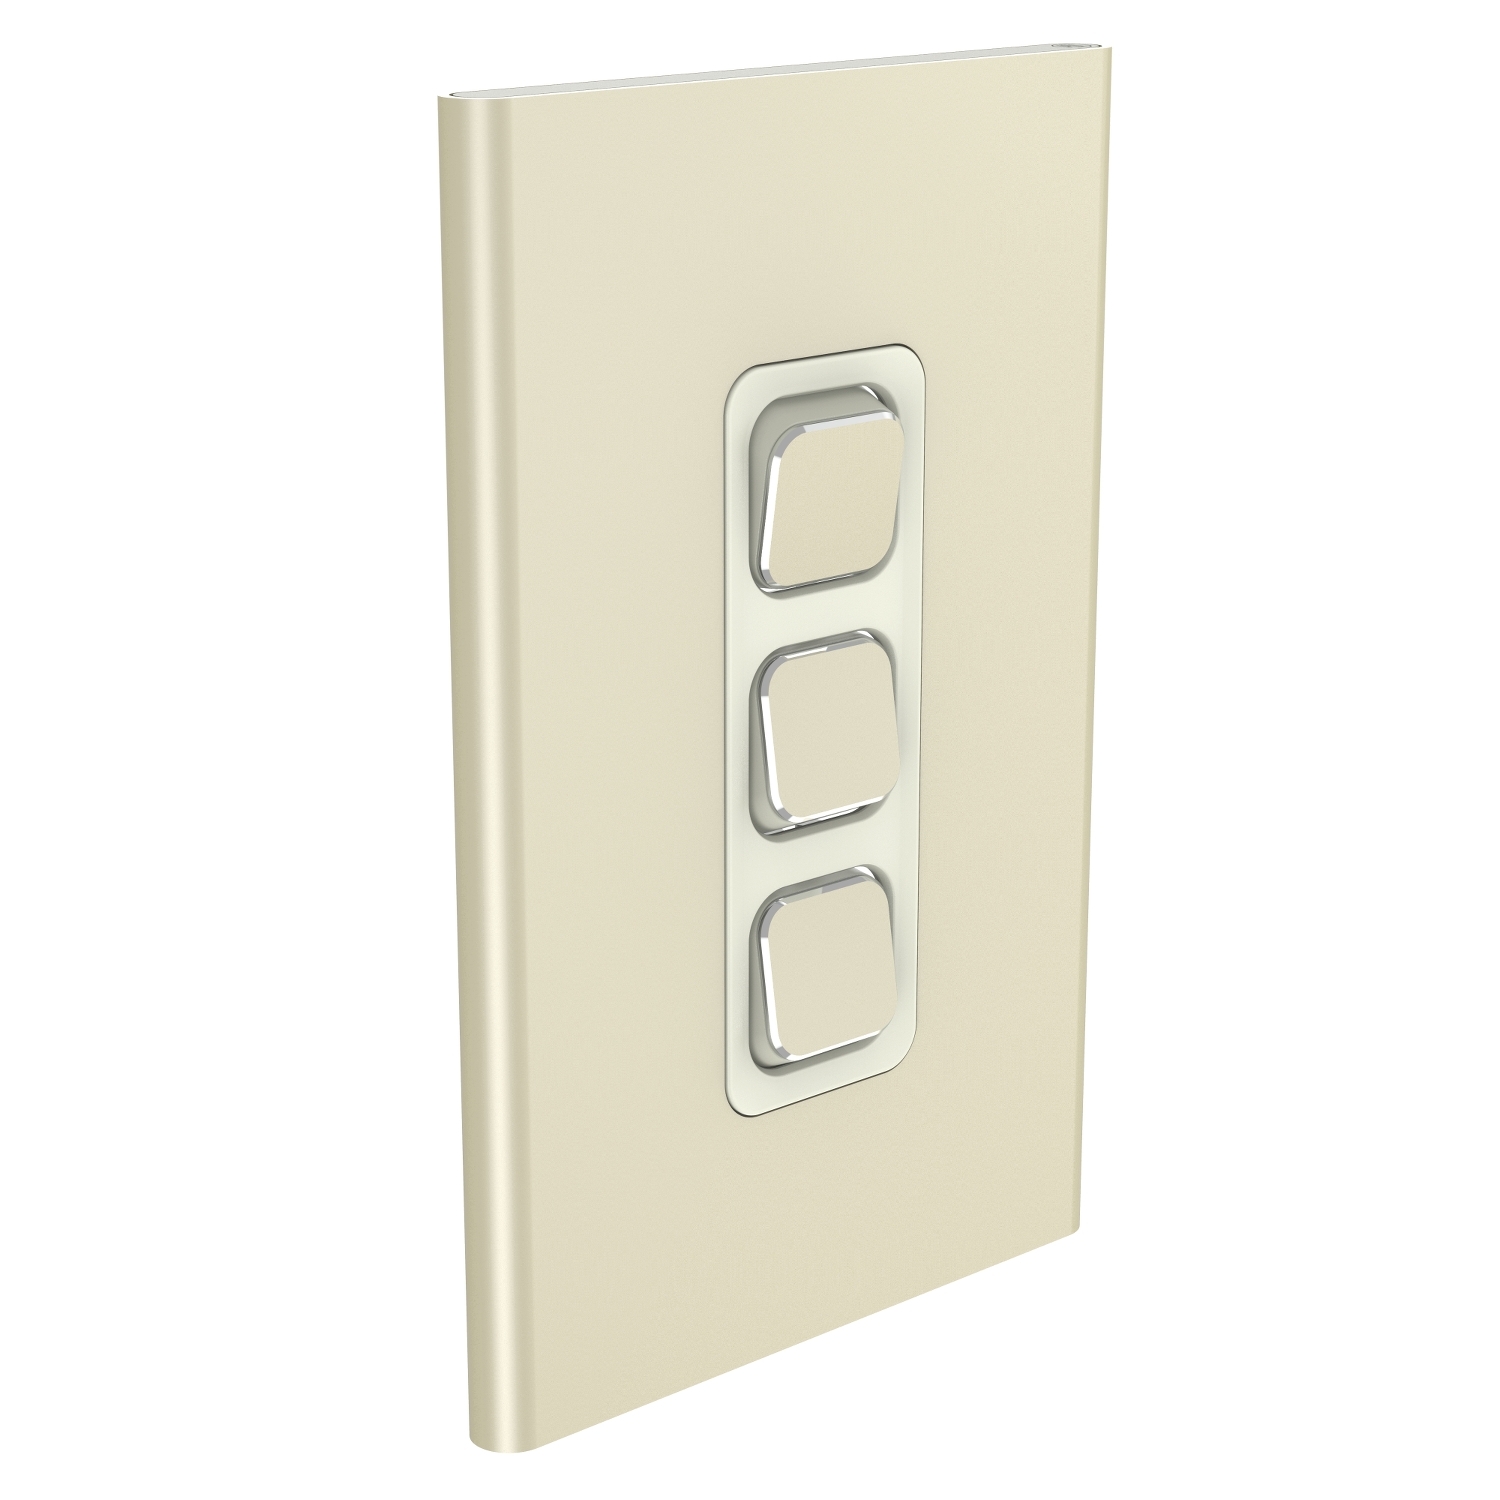 PDL Iconic Styl, cover frame, 3 switches, vertical - Crowne